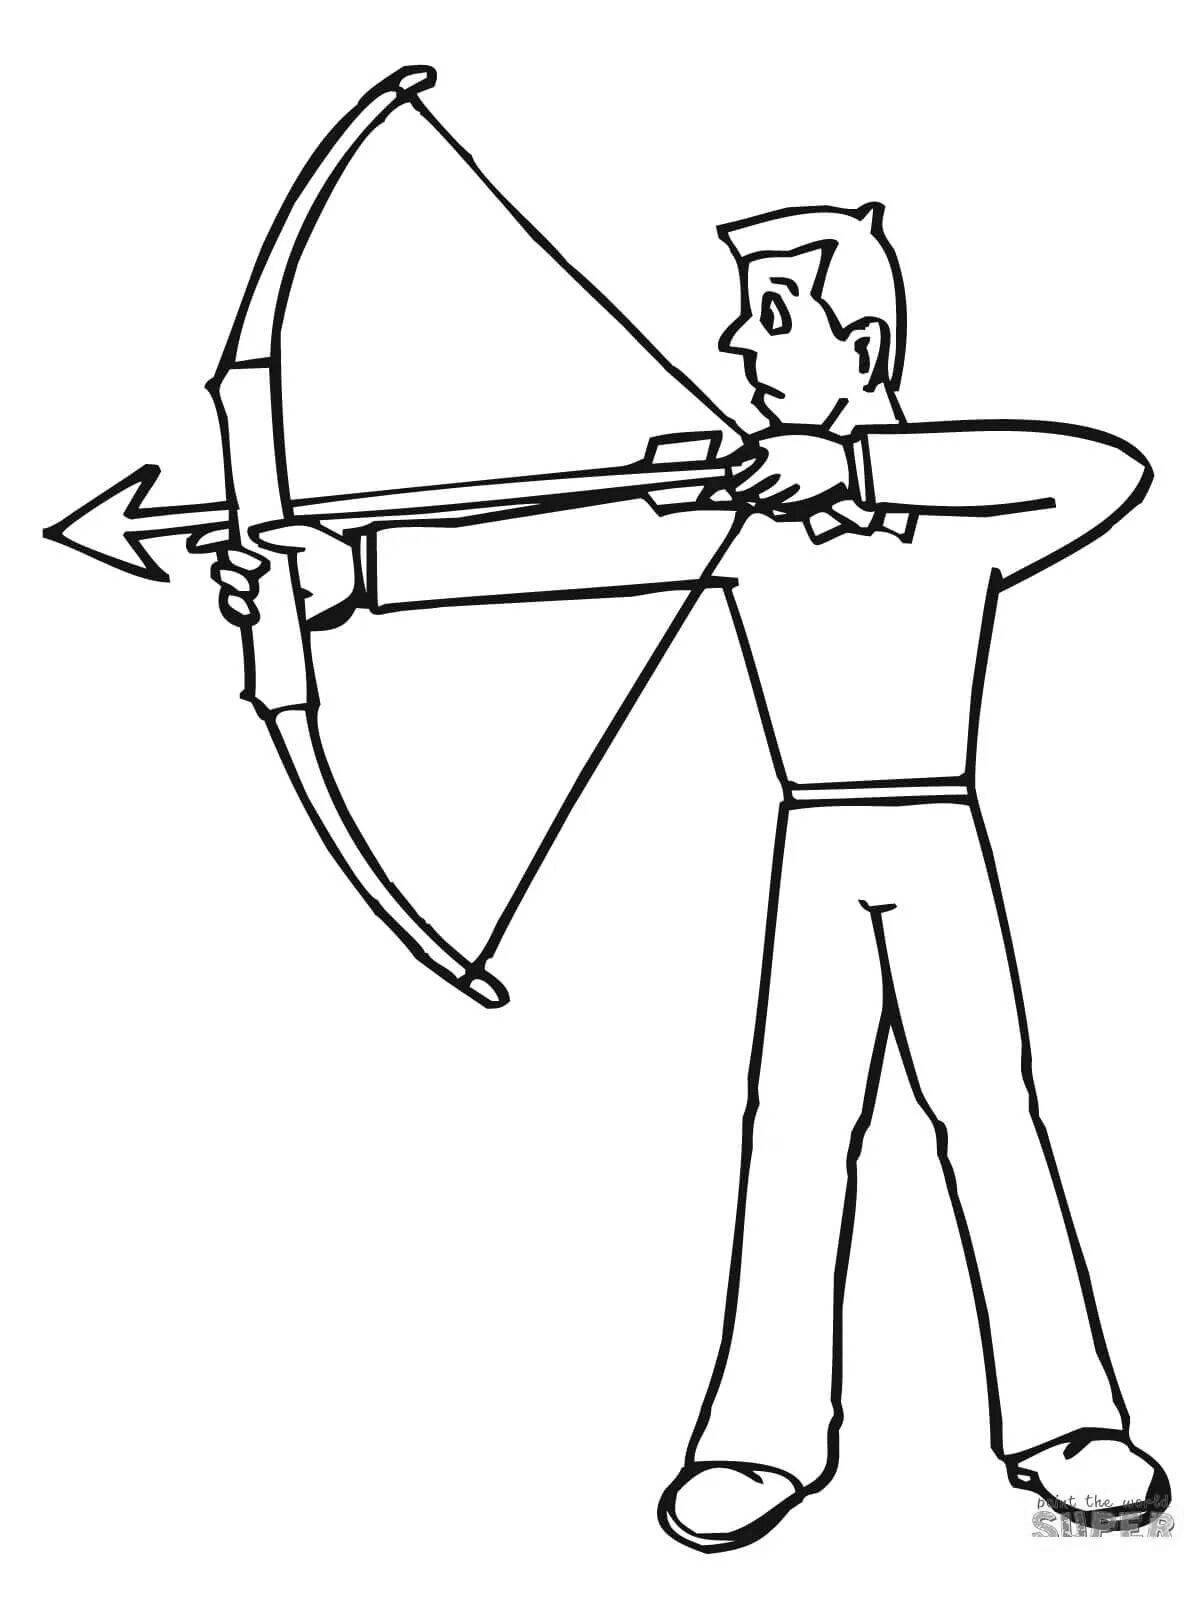 Colorful bow and arrow coloring book